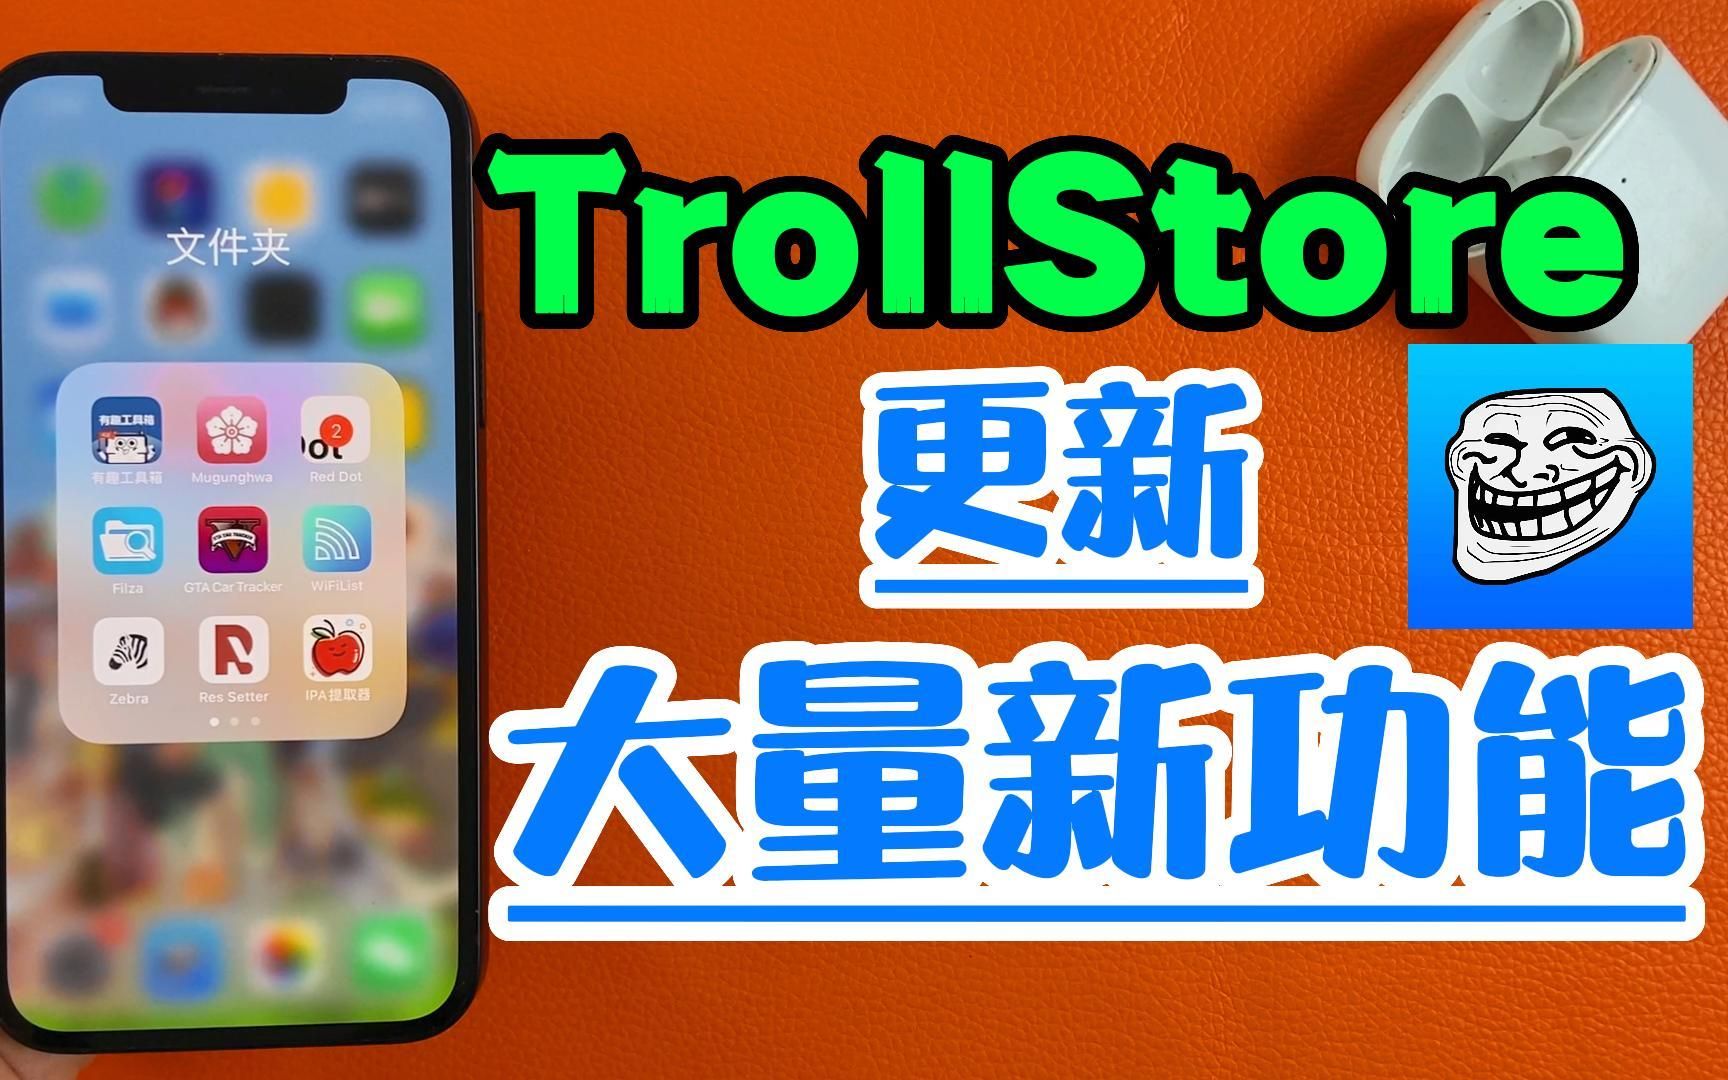 Install TrollStore Without Jailbreak, PC & IPA Support iOS 14.0-14.8.1 ...